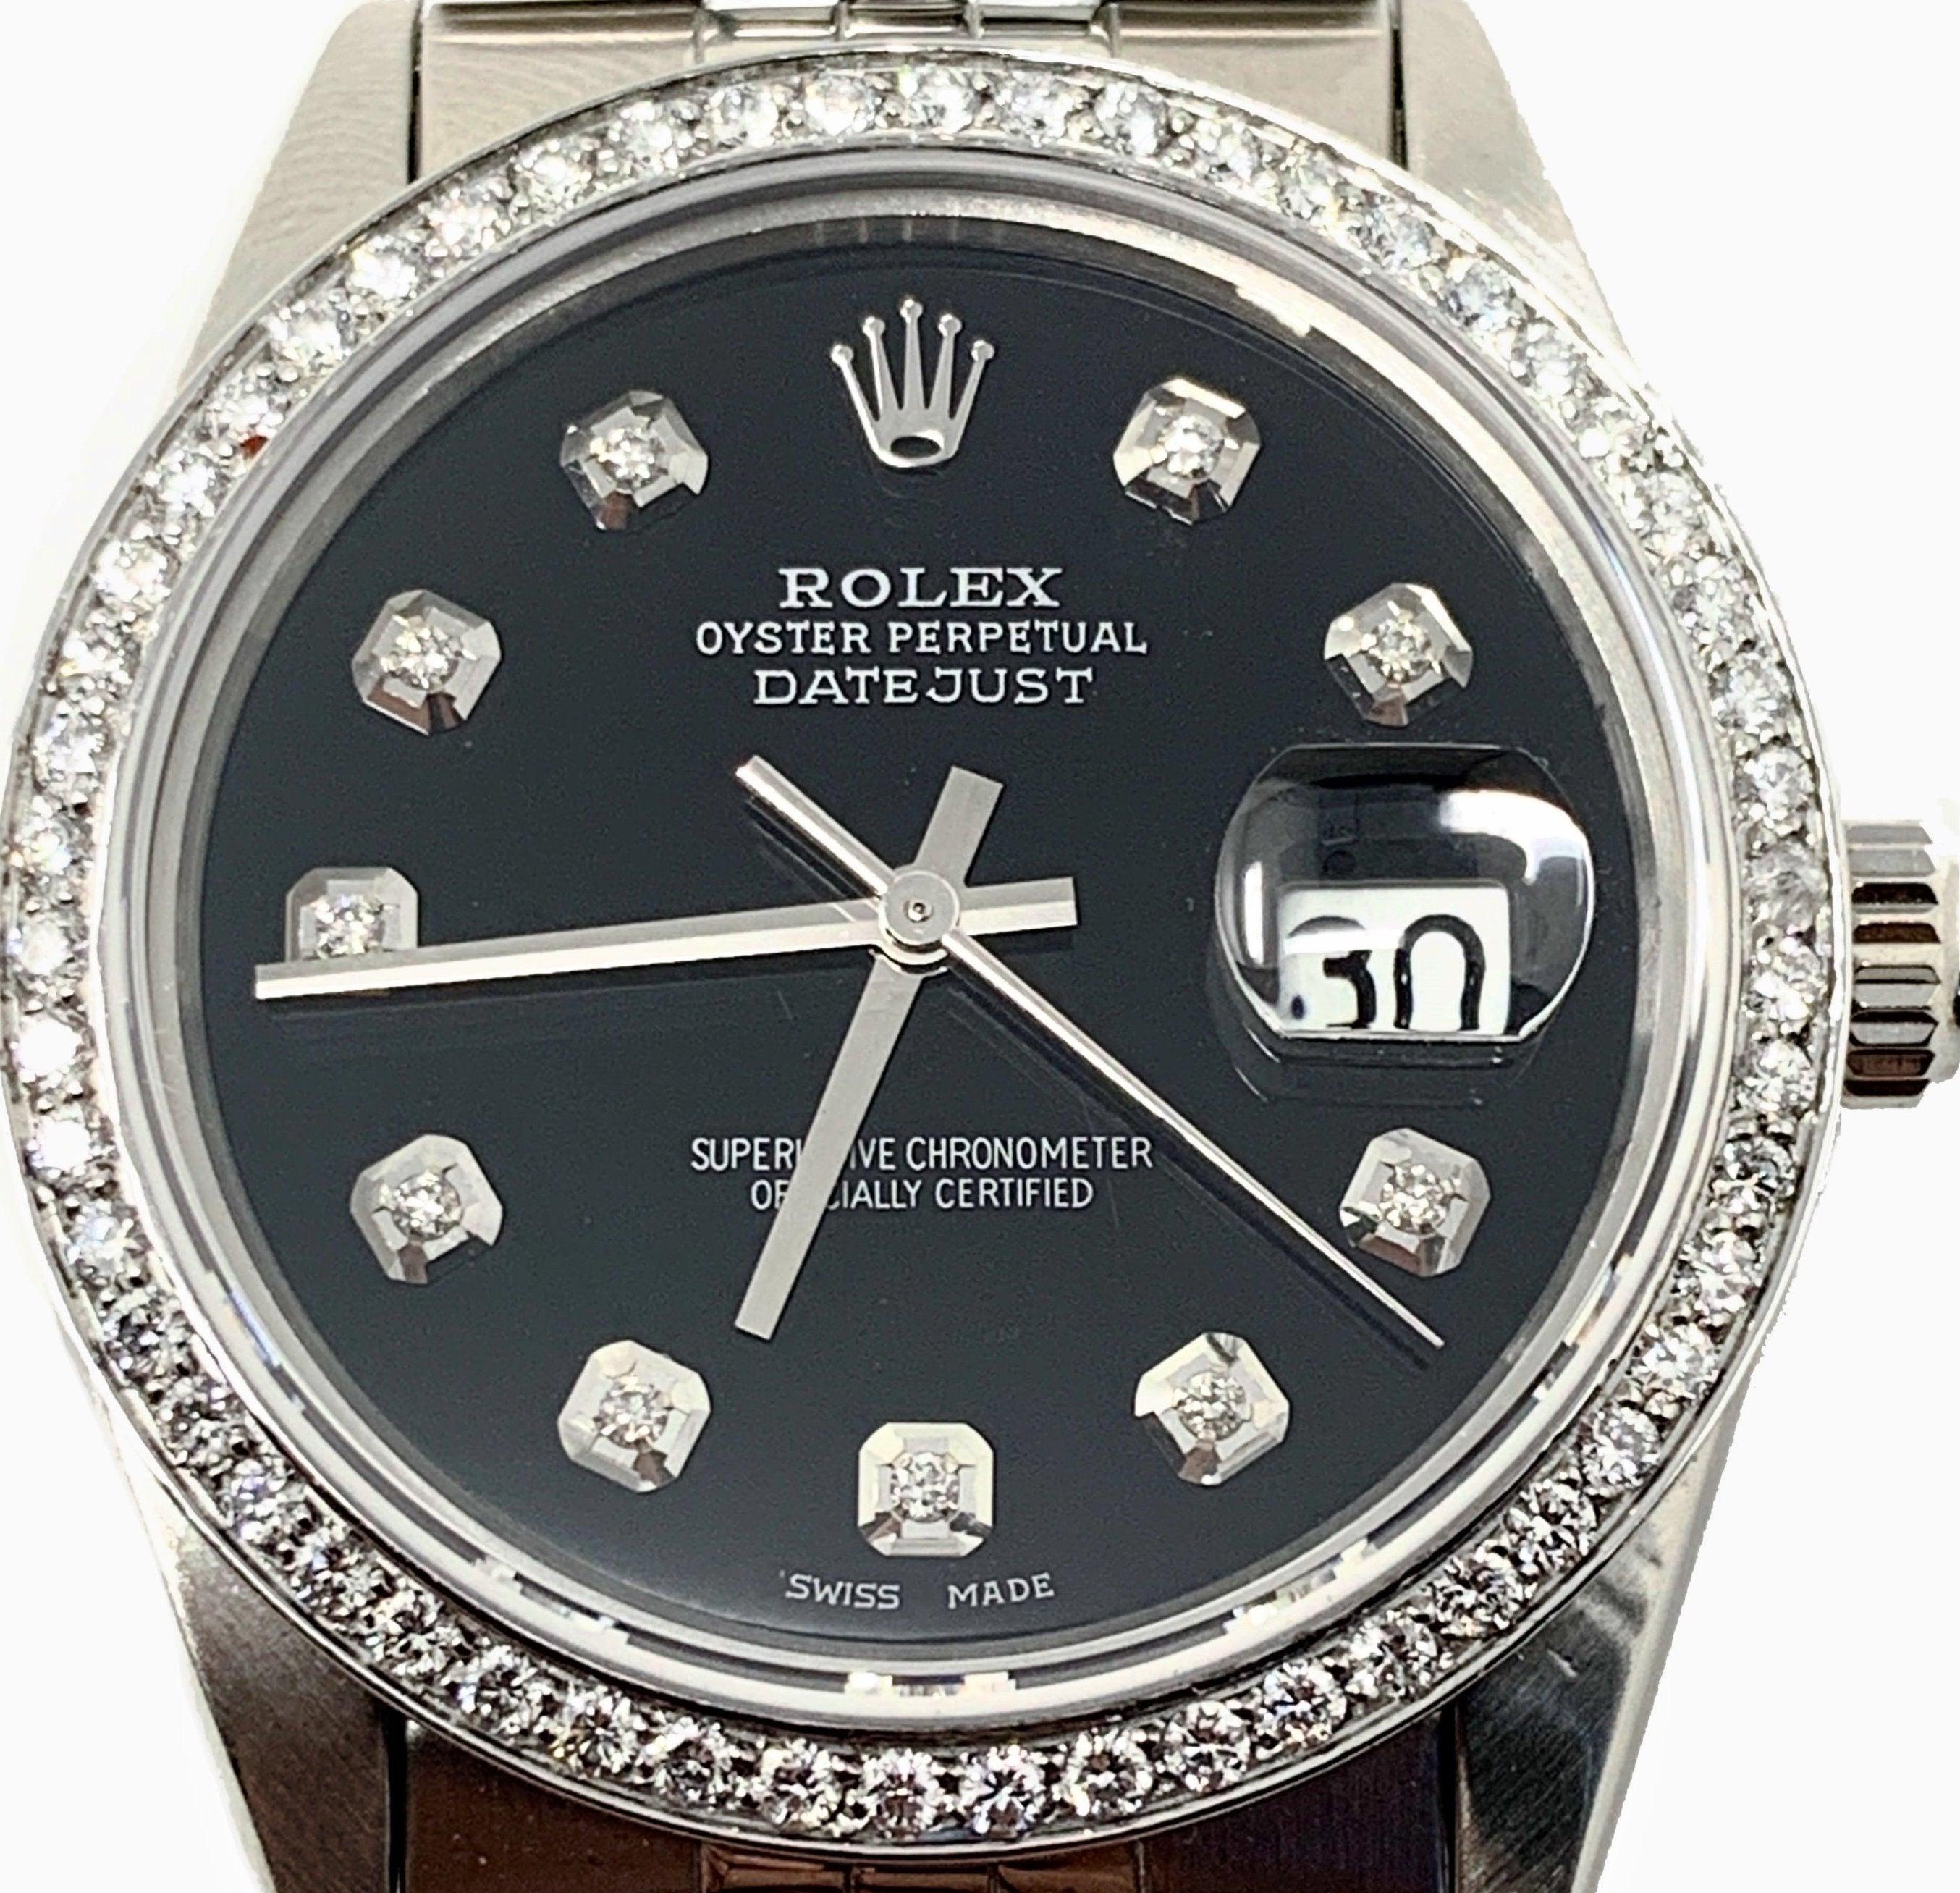 (Watch Description)
Brand - Rolex
Gender - Unisex
Model - 16013 Datejust
Metals - Yellow Gold / Steel 
Case size - 36mm
Bezel -Yellow Gold Diamond
Crystal - Sapphire
Movement - Automatic caliber 3035
Dial - Finished Blue Diamond
Wrist band - Two